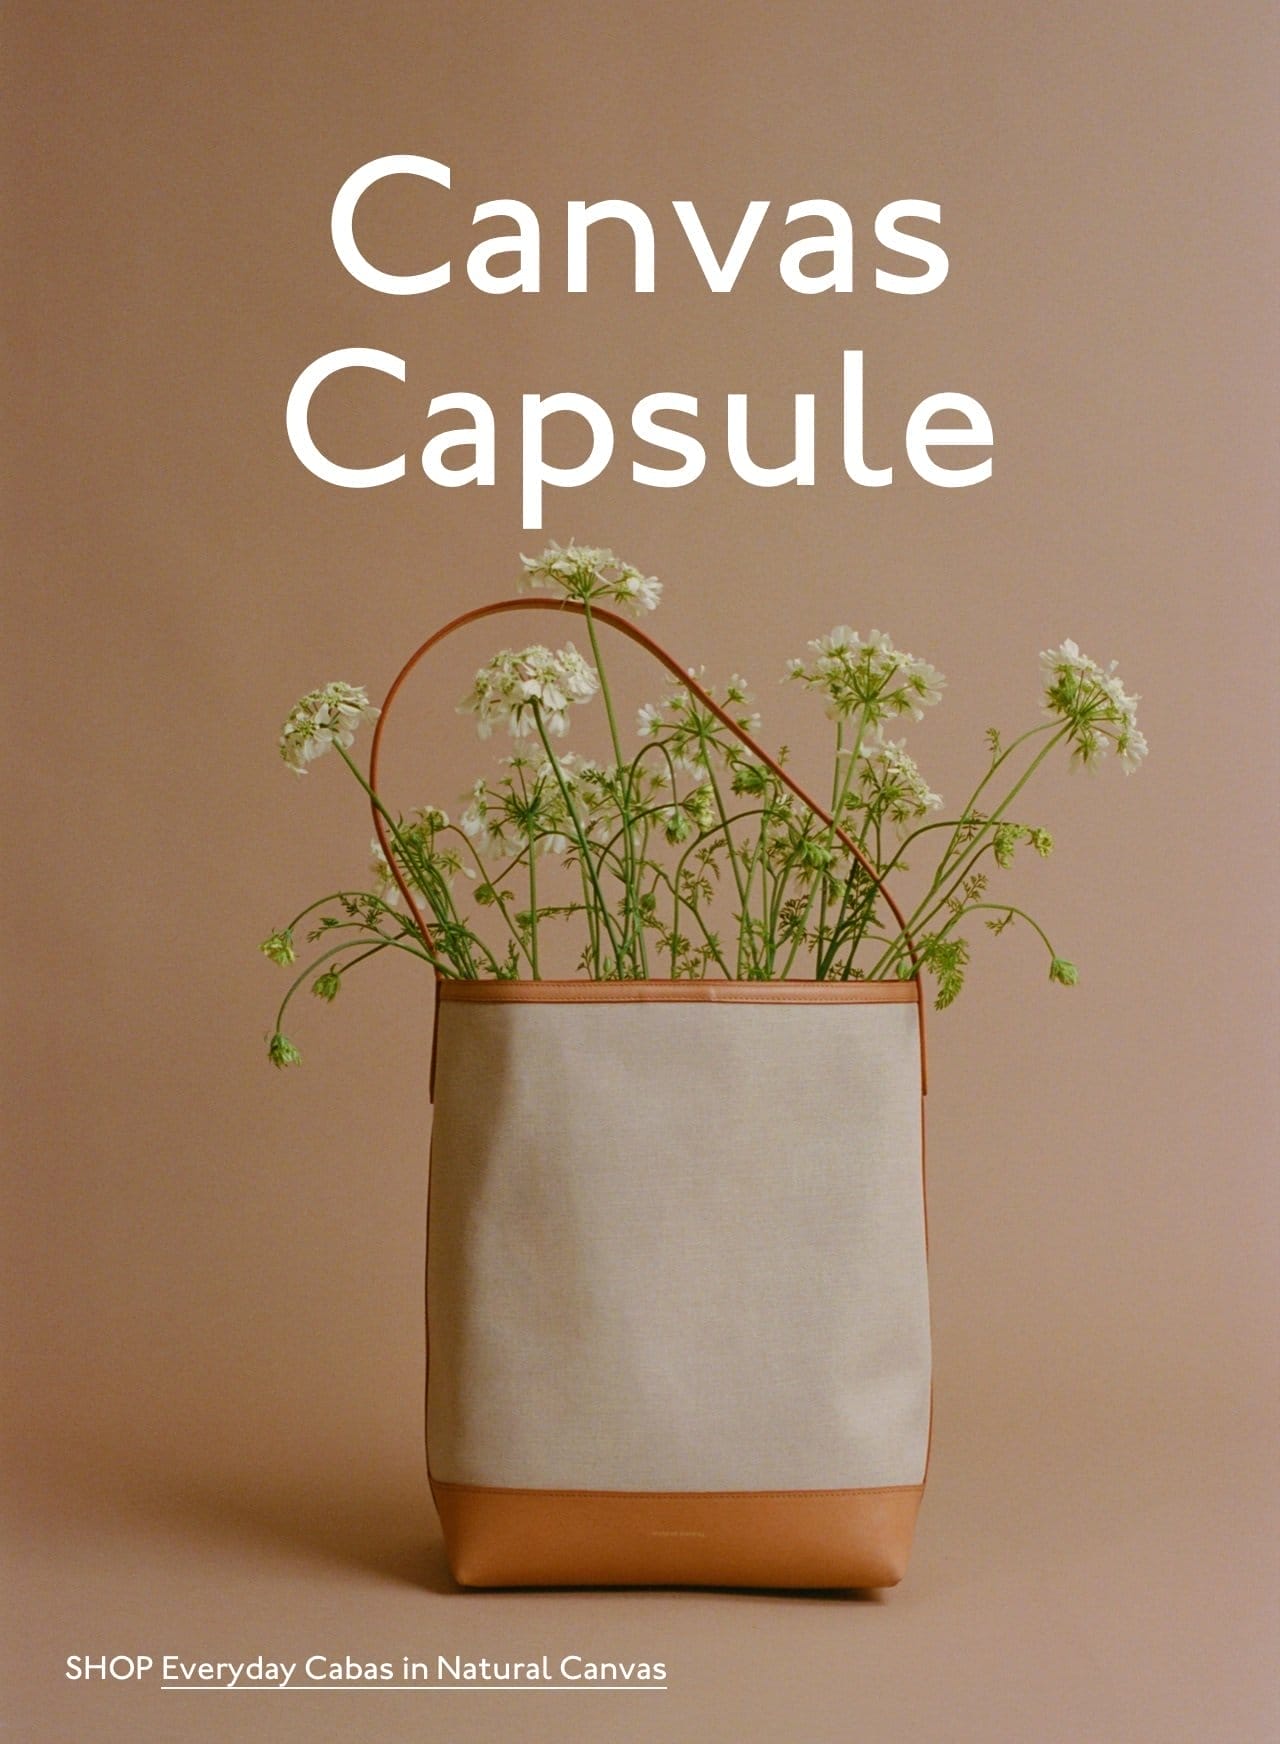 New canvas capsule. Pictured: Everyday Cabas in Natural Canvas and Cammello vegetable tanned leather trim.